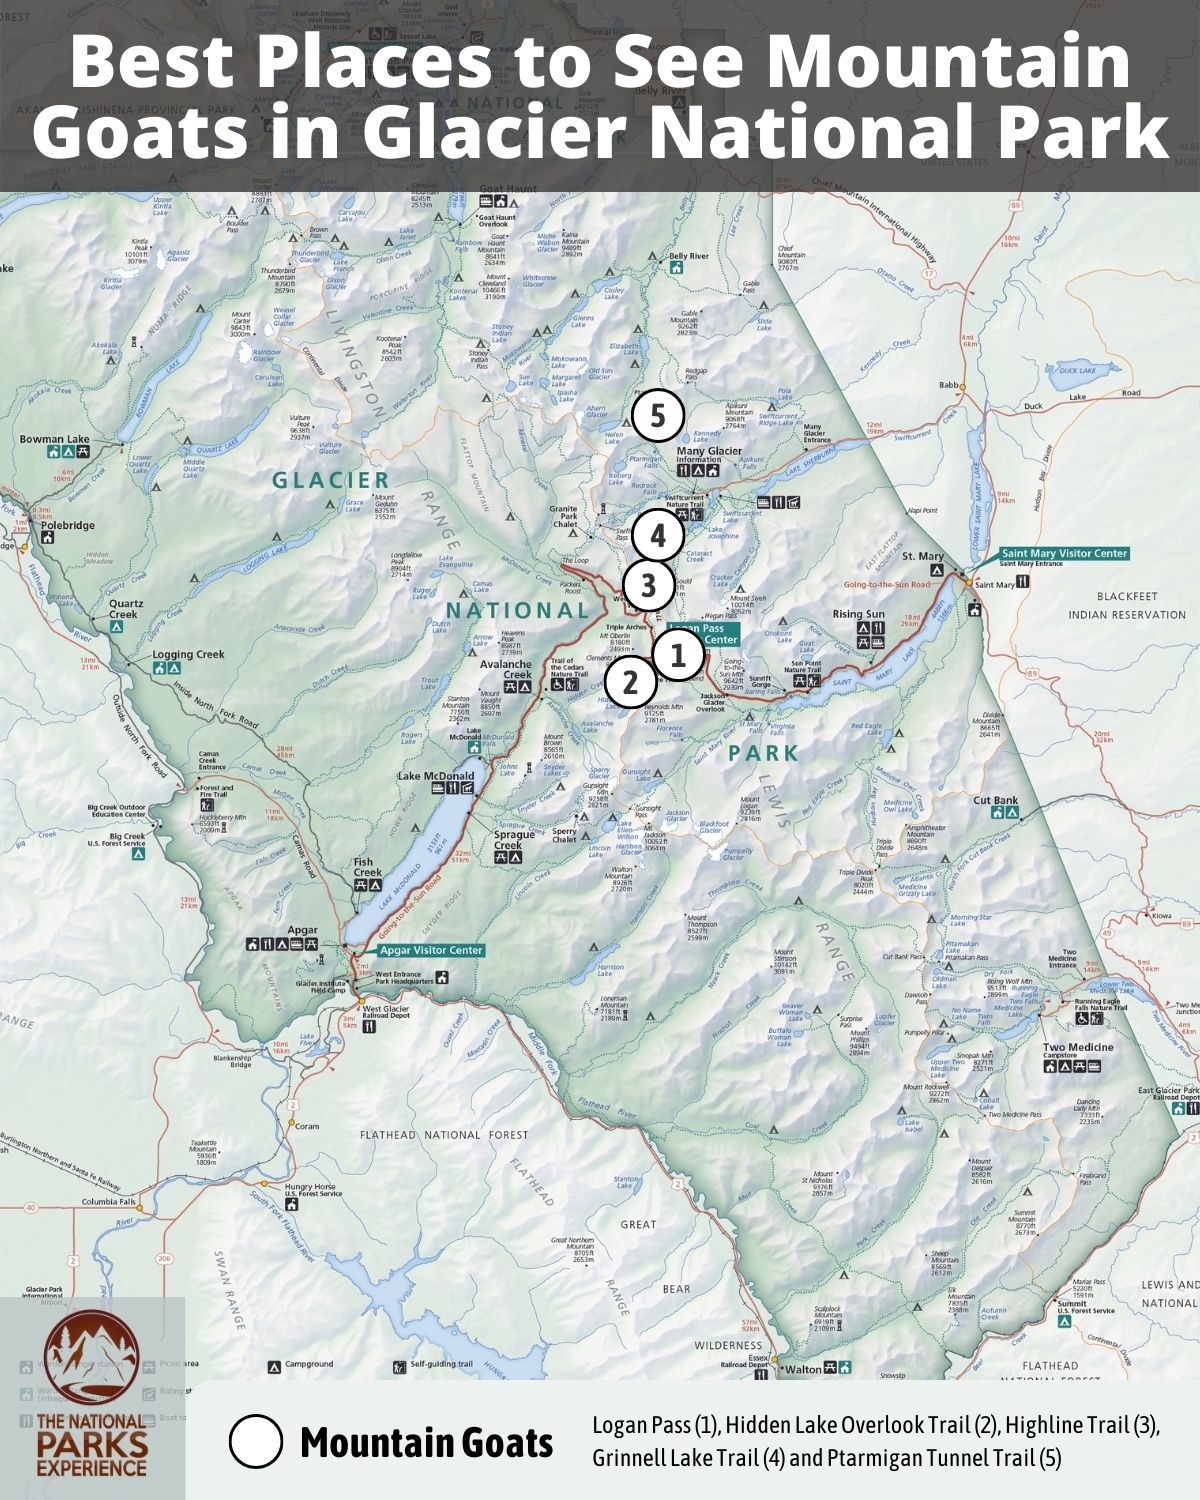 Map of the Best Places to See Mountain Goats in Glacier National Park, Montana